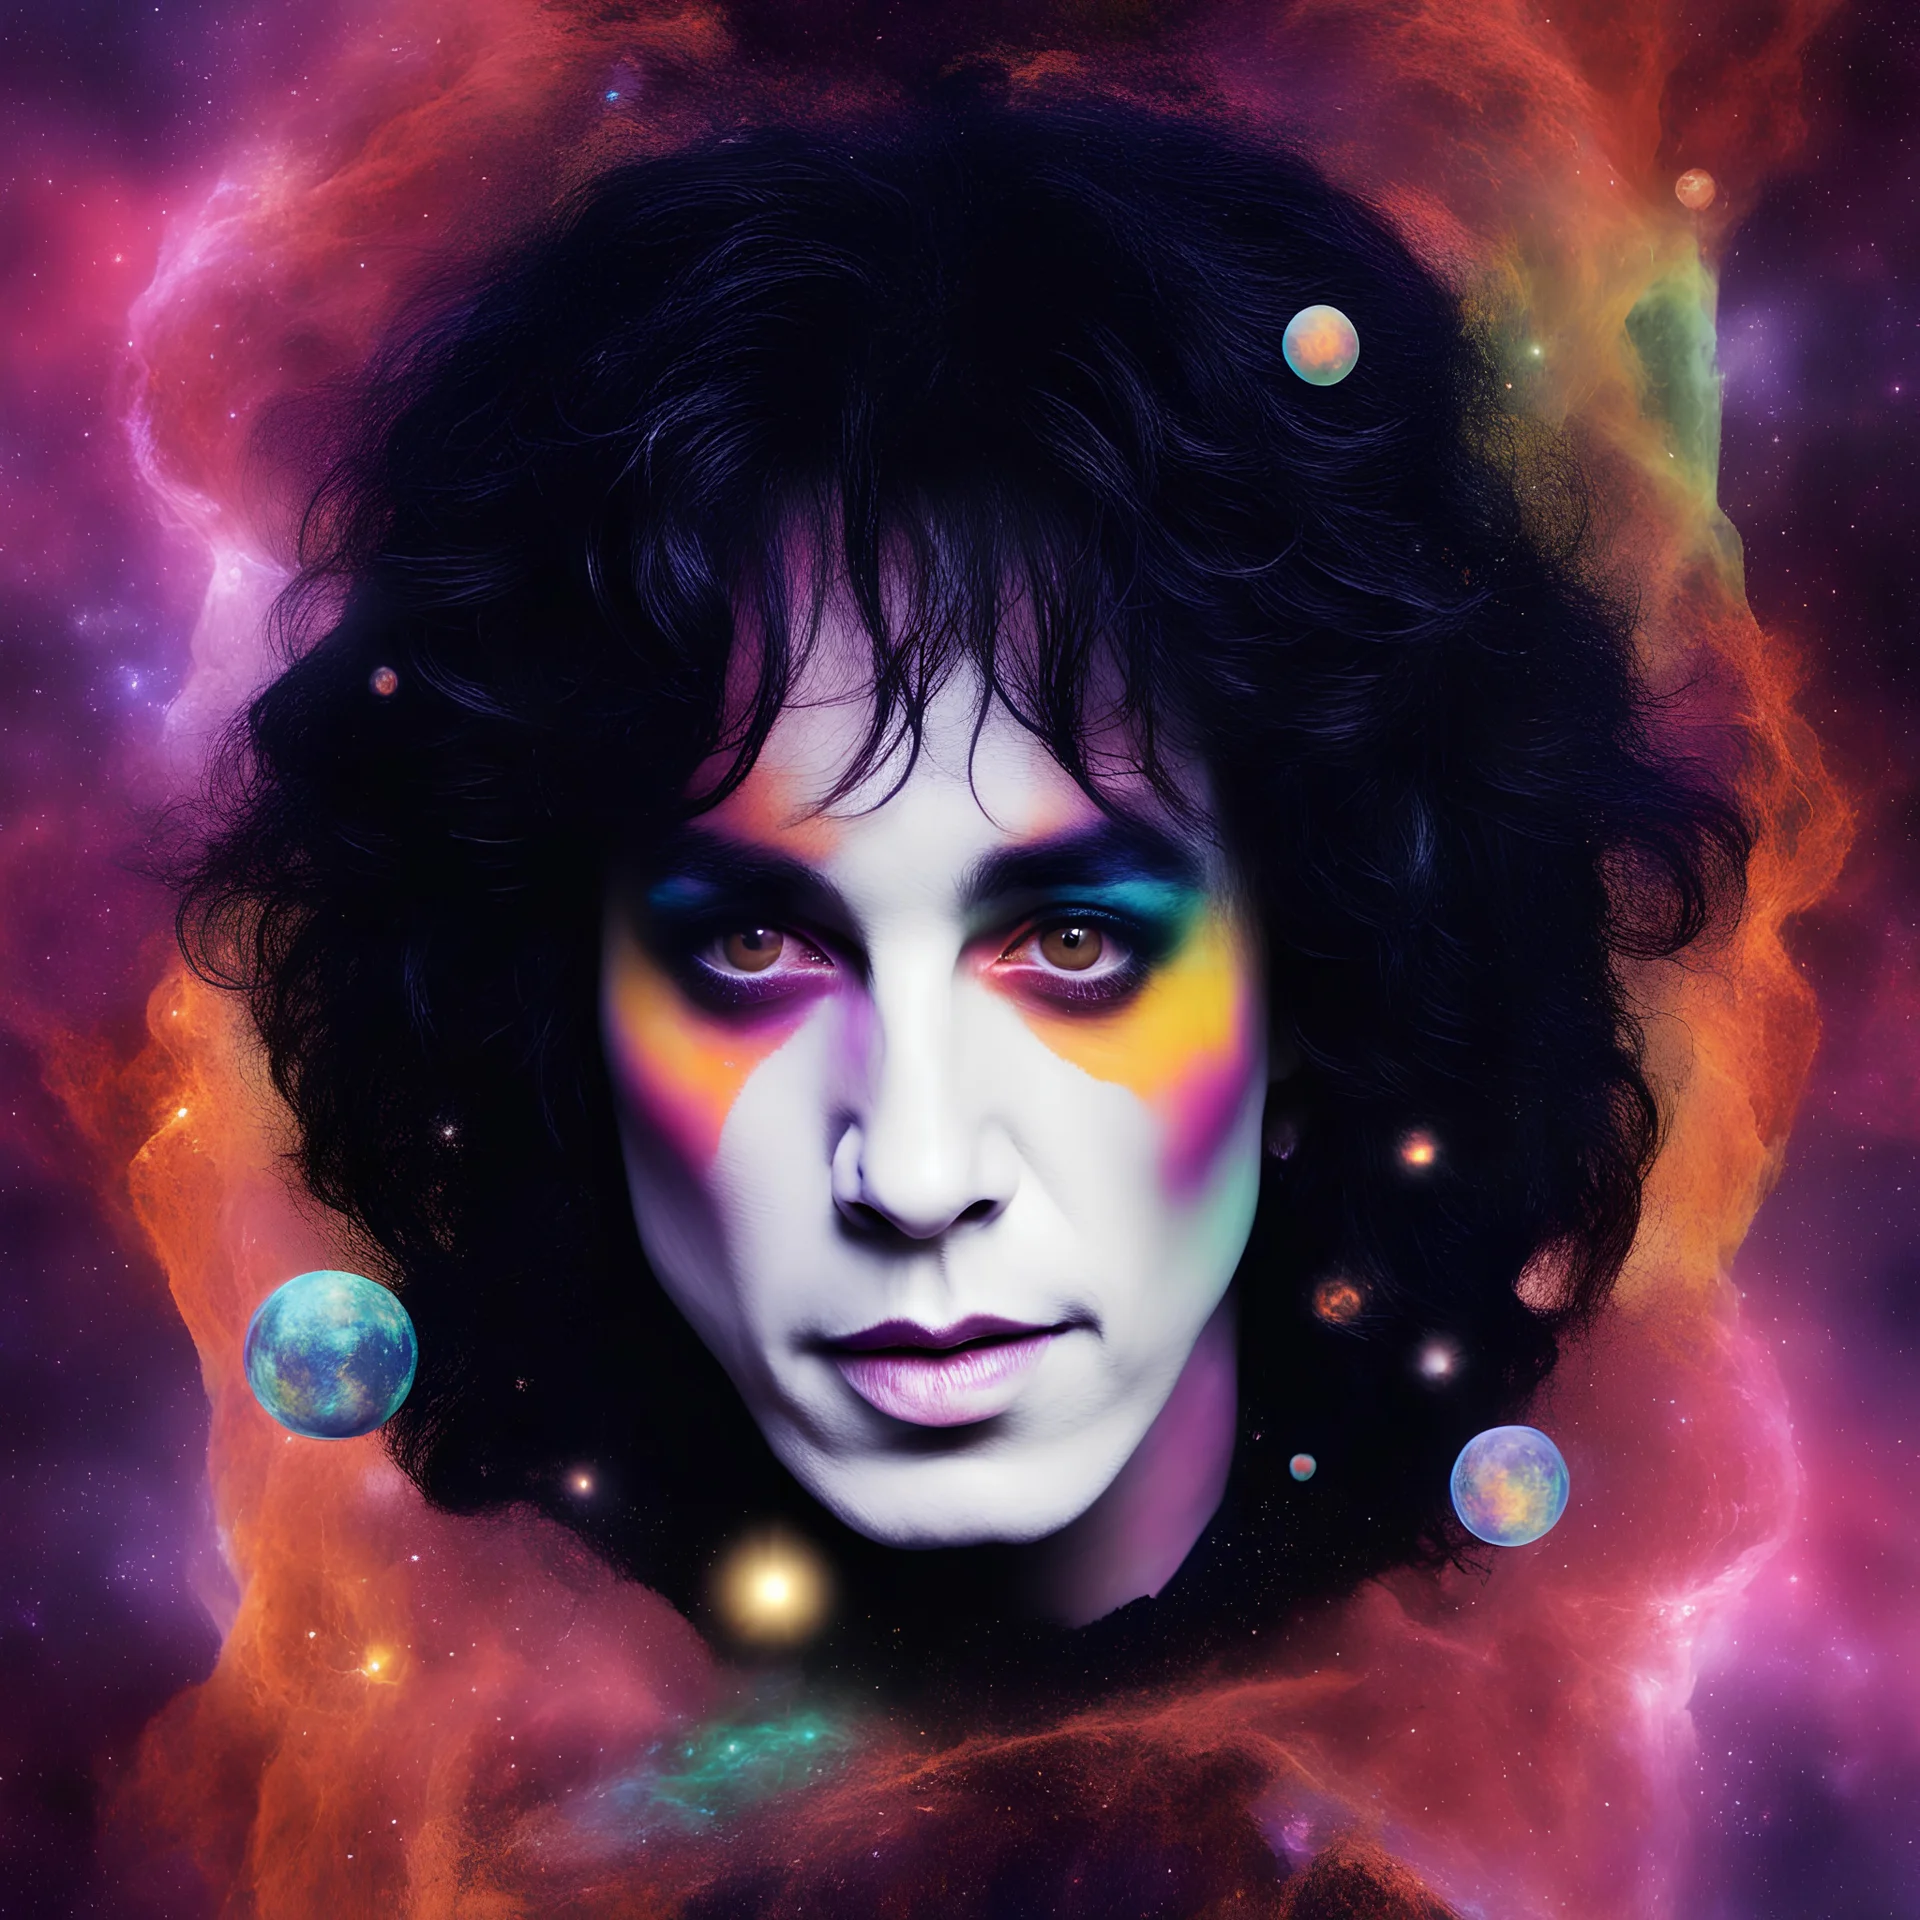 Paul Stanley, 3D hearts and Stars and Bubbles, heart-shaped, electrifying, Gods and Monsters, close-up, portrait, double exposure shadow of the ghost, Invisible, poignant, extremely colorful, Dimensional rifts, multicolored lightning, outer space, planets, stars, galaxies, fire, explosions, smoke, volcanic lava, Bubbles, craggy mountain peaks the flash in the background, 32k UHD, 1080p, 1200ppi, 2000dpi, digital photograph, heterosexual love, speedforce